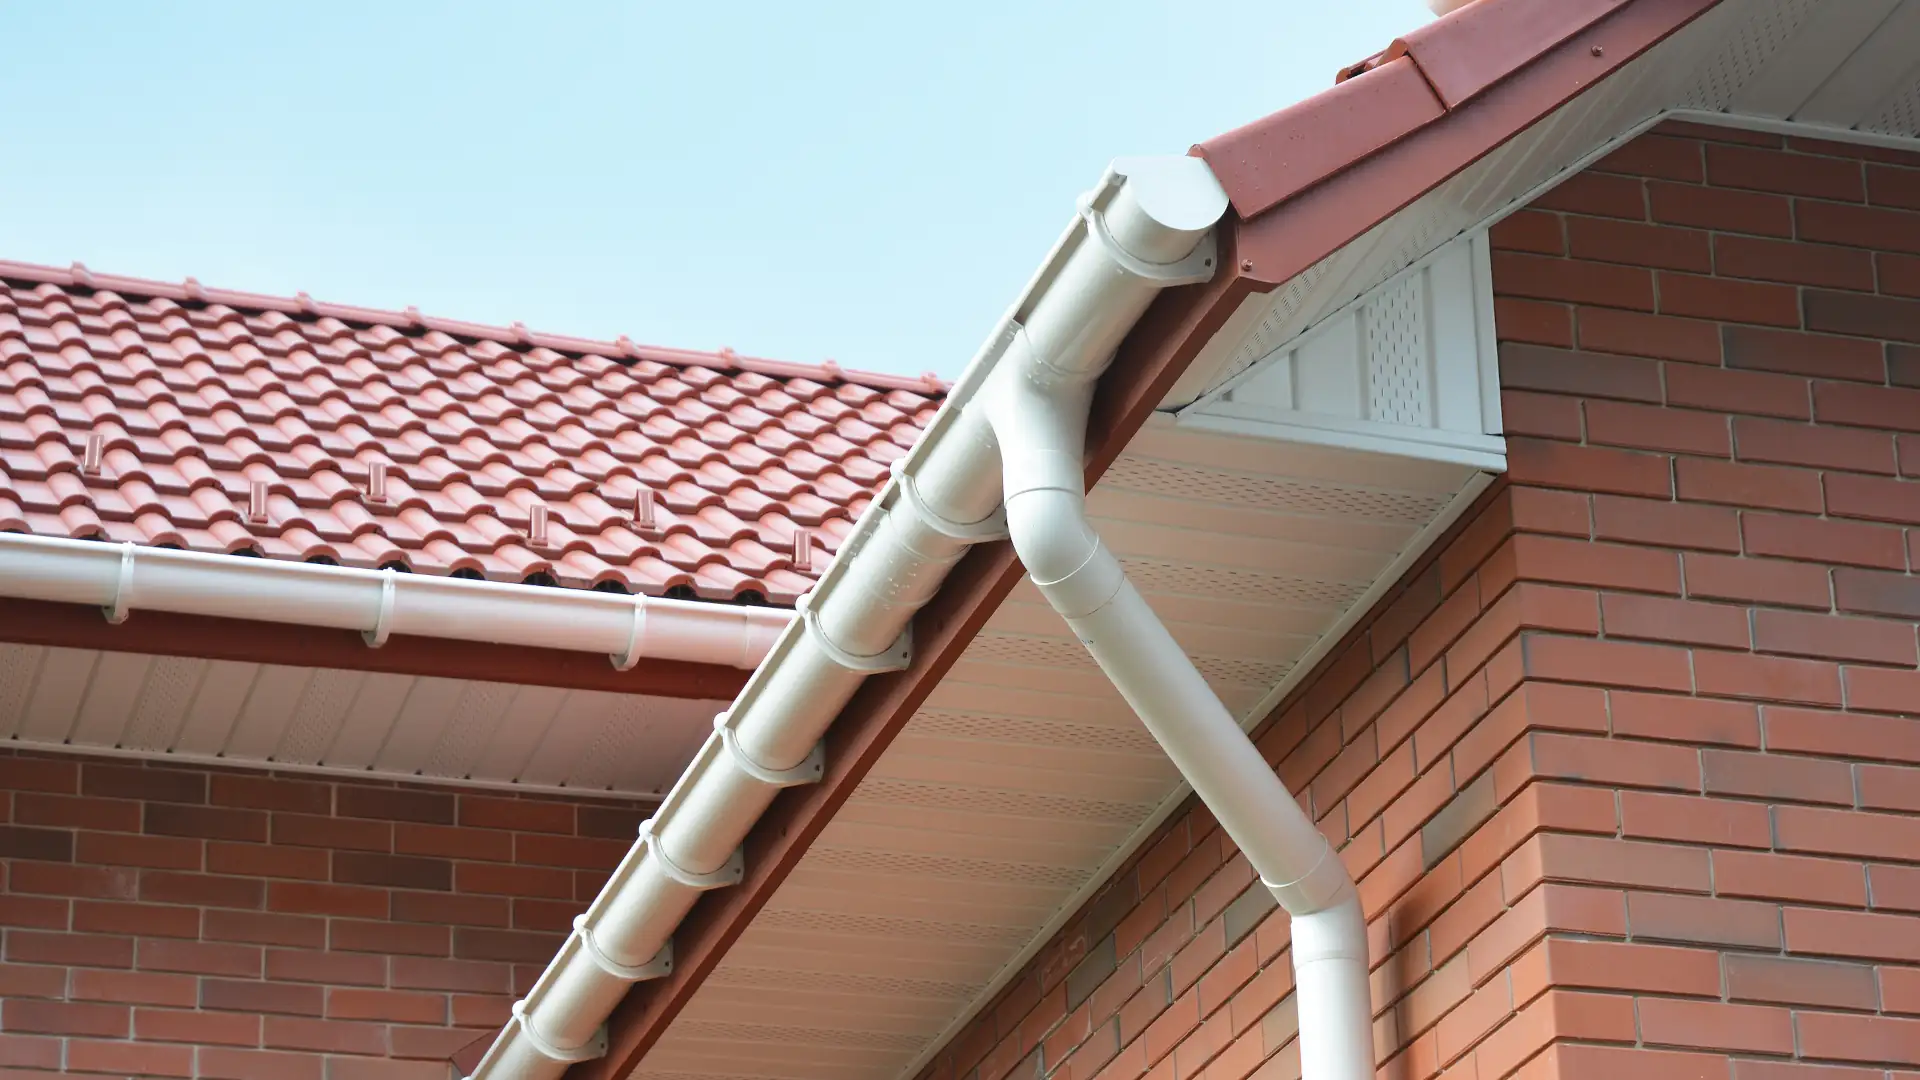 House drainage system - gutters and downspout on a residential house.